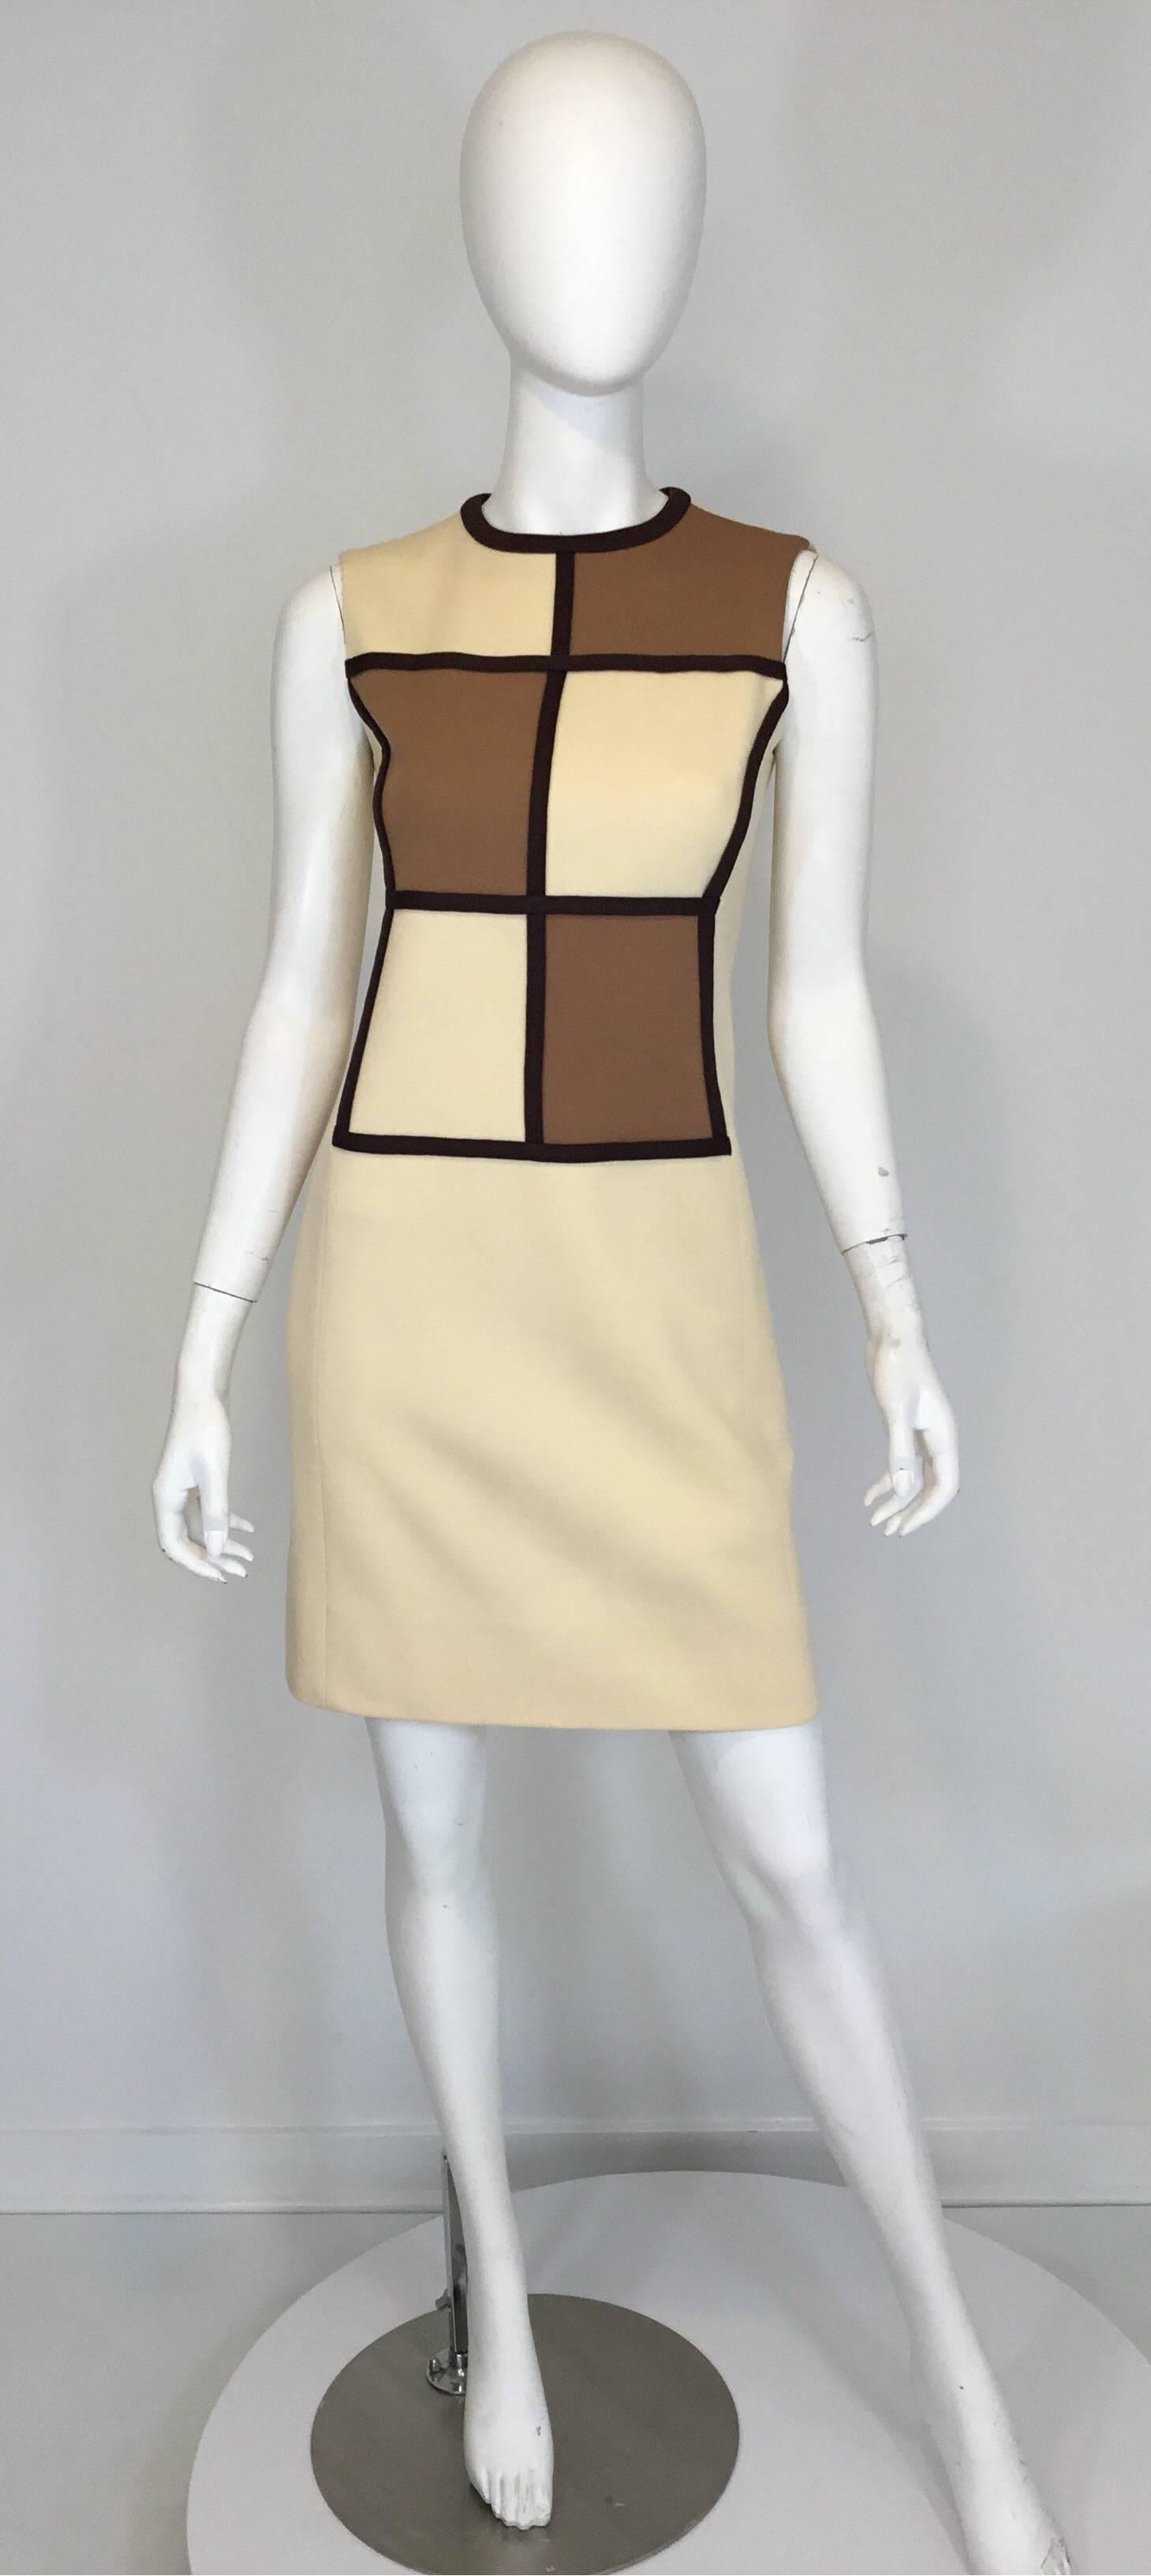 Vintage Lilli Ann mod 1960's dress and coat set. Coat features a grid pattern in a brown/tan color combo with concealed snap button closures and slits at the sides of the hem. Dress has a back zipper closure as well as a hook-and-eye fastening. Both